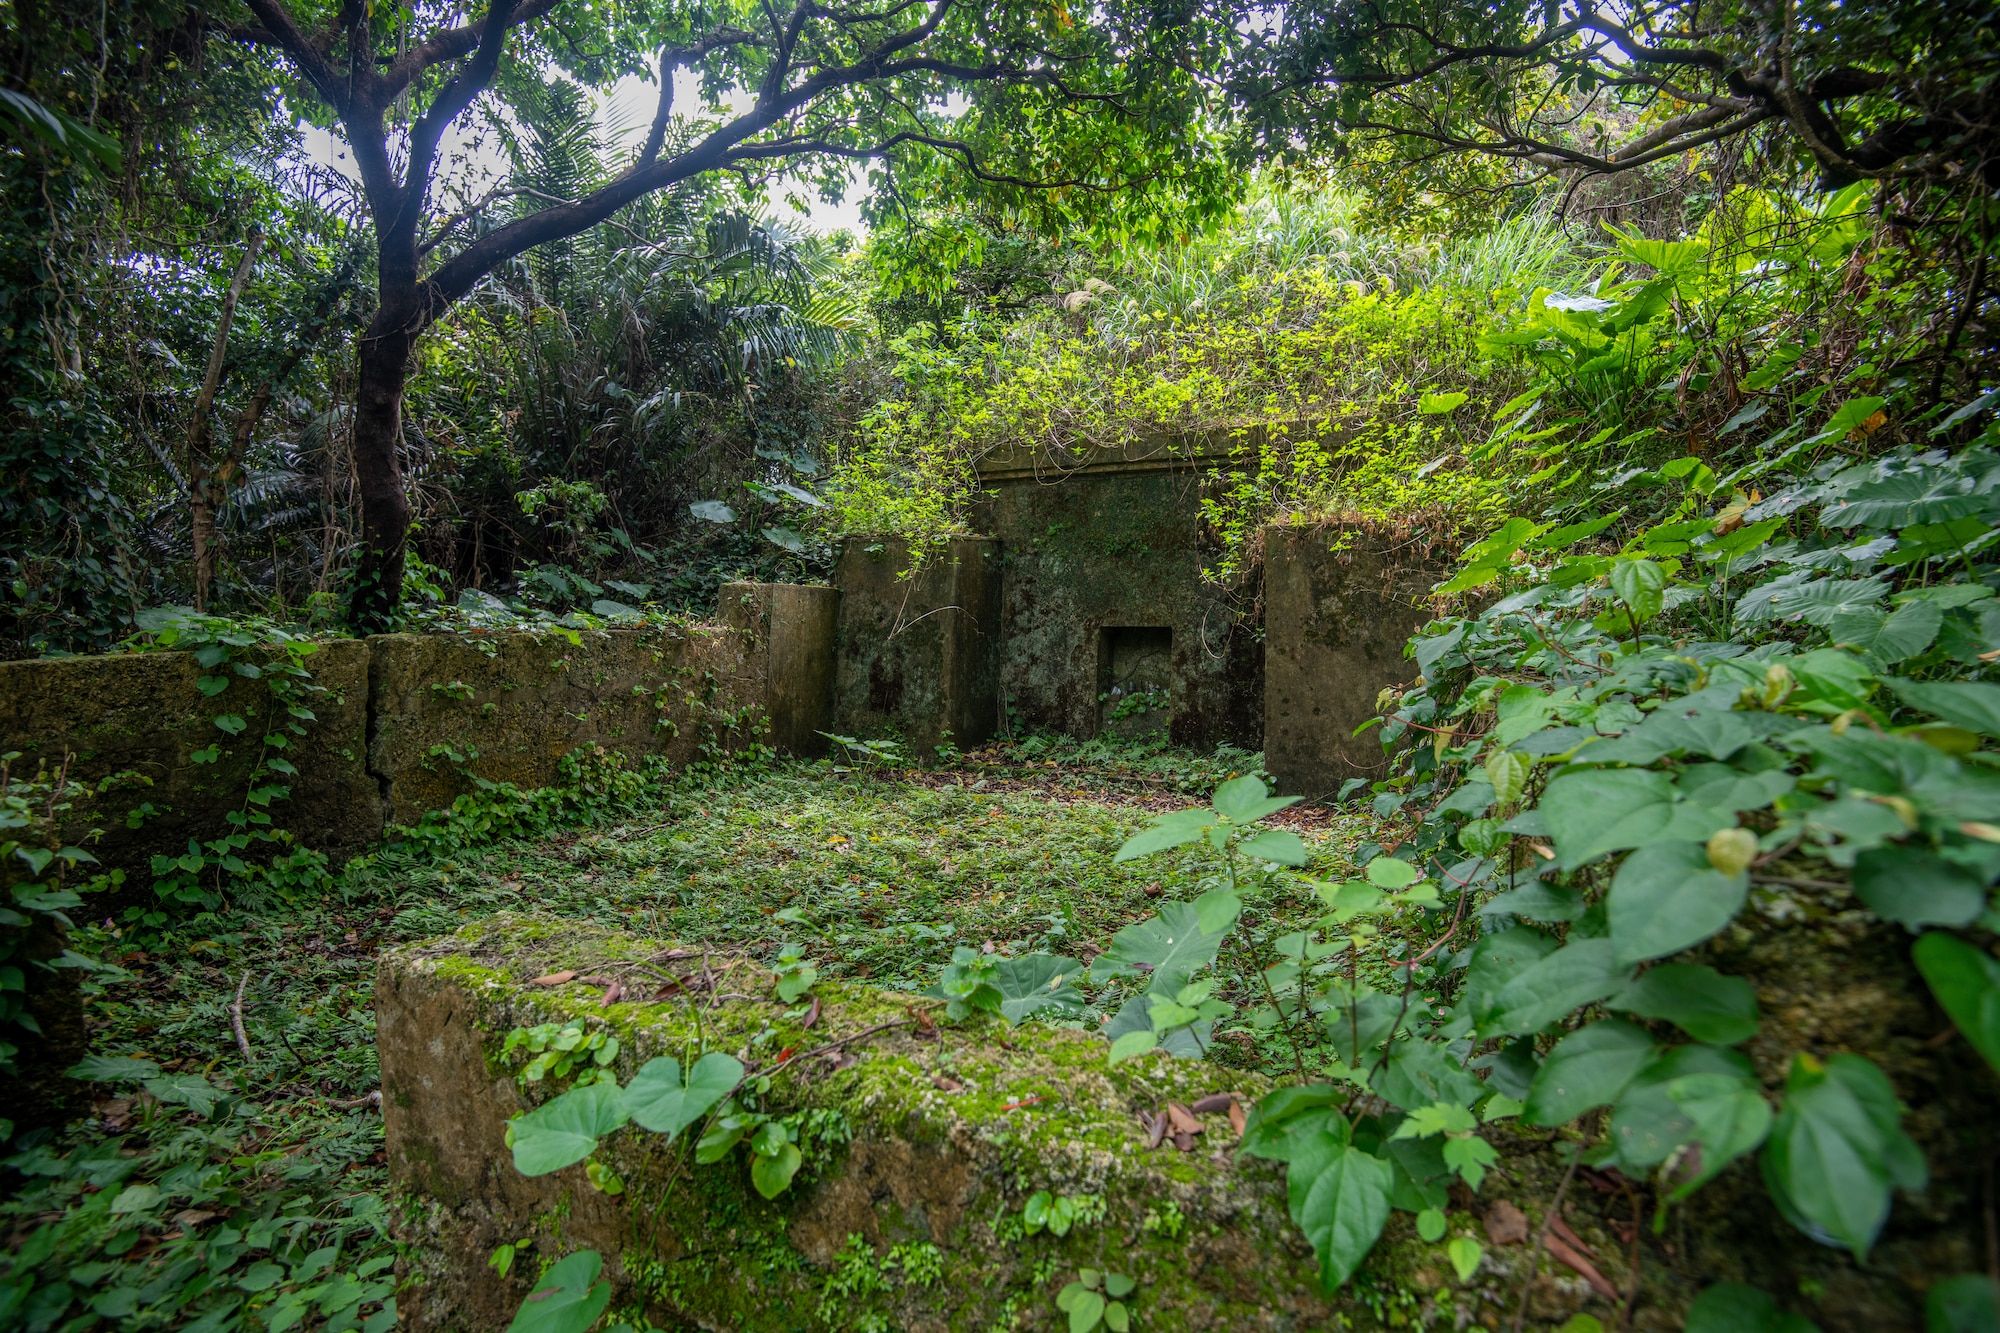 A yet-to-be-cleaned, ancestral Okinawan tomb.